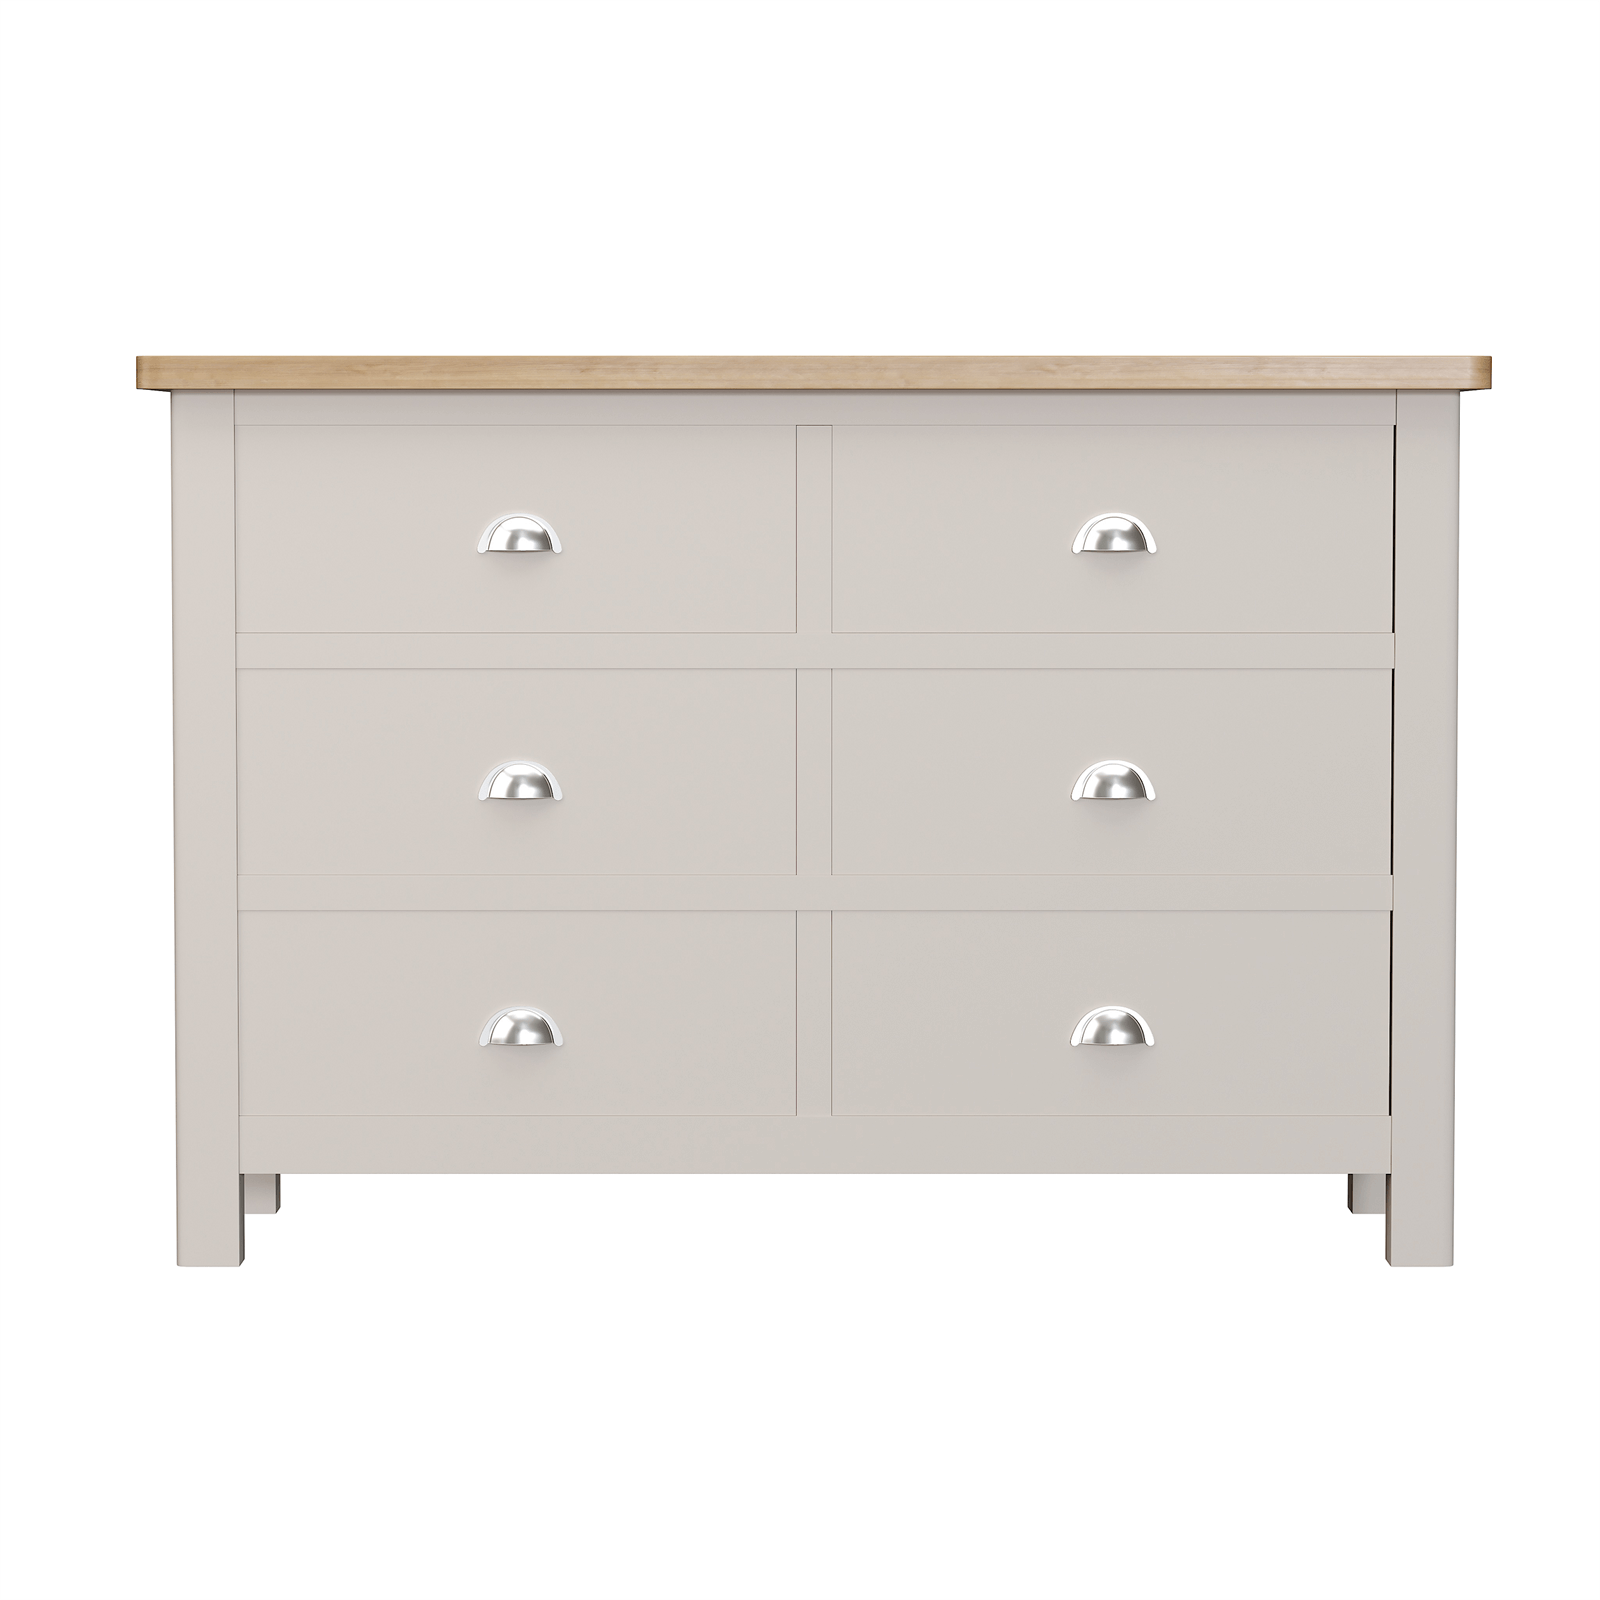 Padstow 6 Drawer Chest of Drawers - Truffle